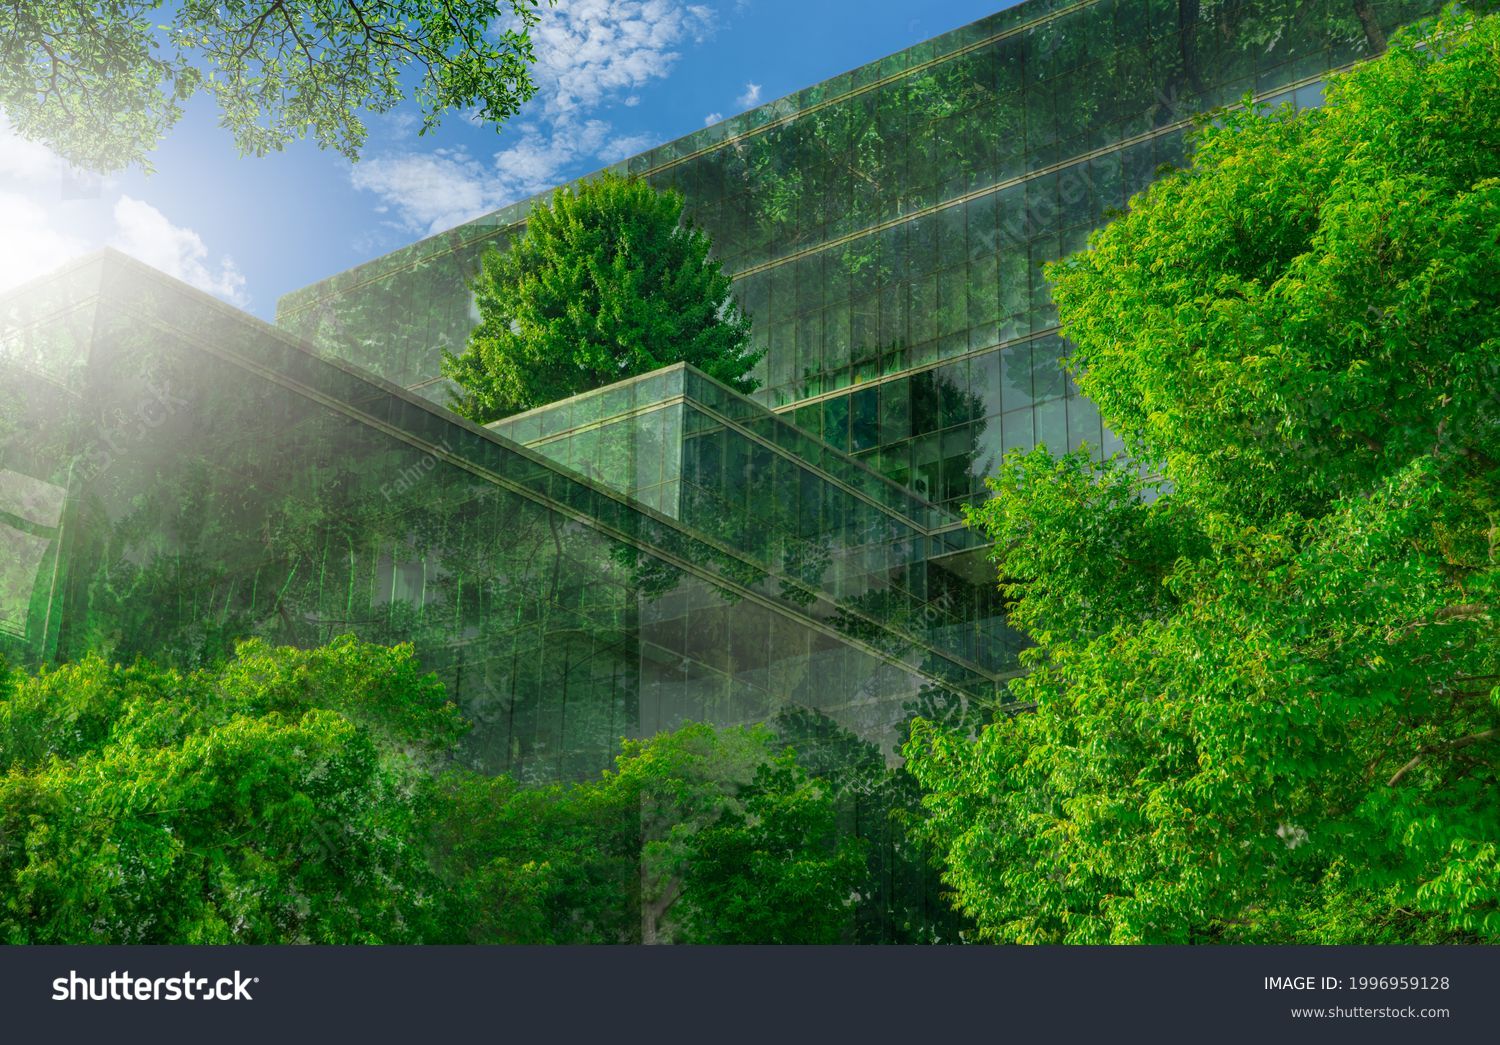 Selective focus on tree and eco friendly building with vertical garden in modern city. Green tree forest on sustainable glass building. Office building with green environment. Go green concept. #1996959128